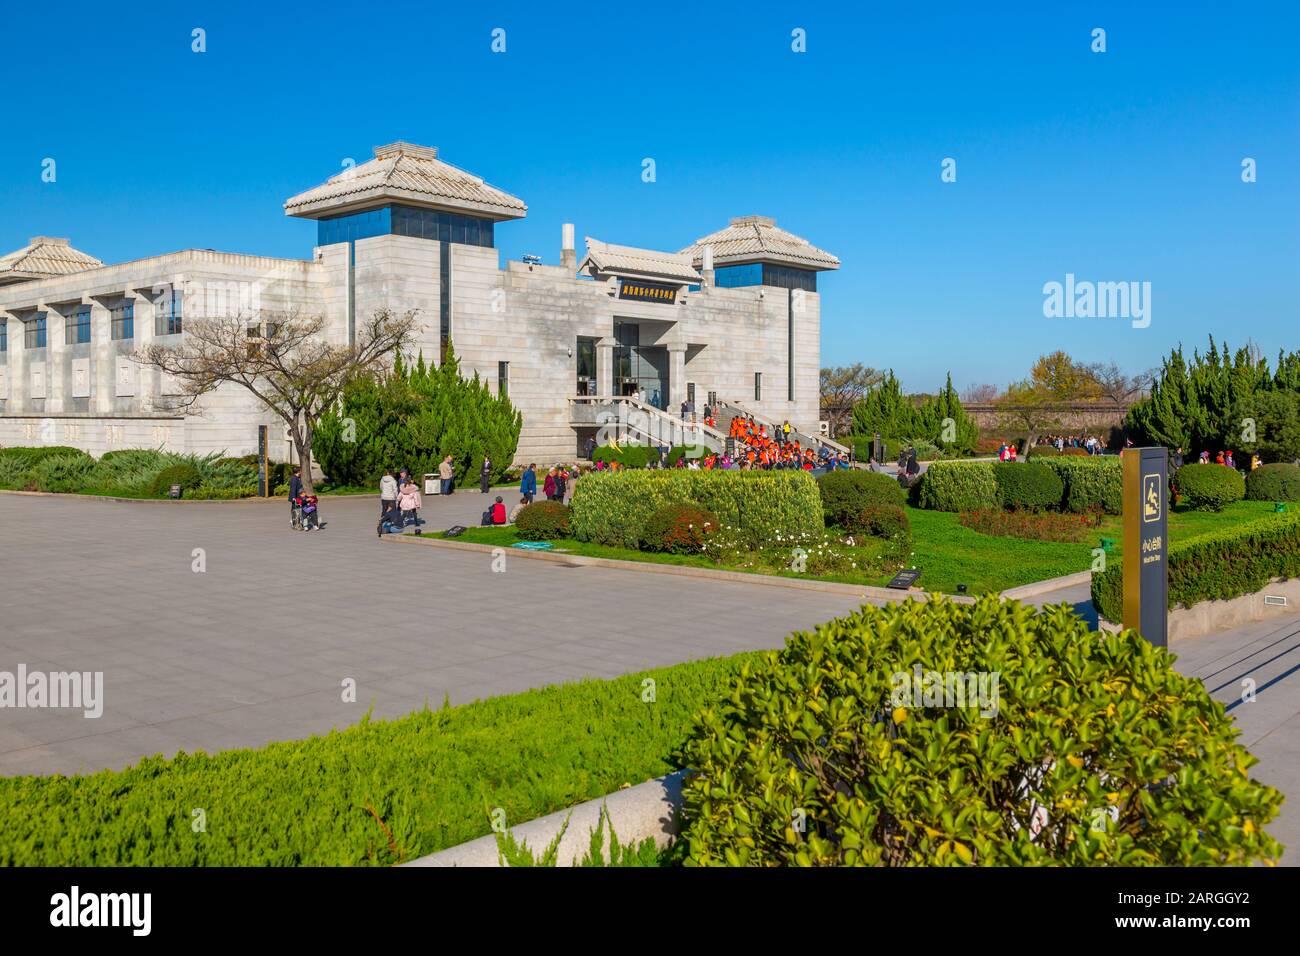 View of entrance to Terracotta Warriors Tomb Museum, Xi'an, Shaanxi Province, People's Republic of China, Asia Stock Photo